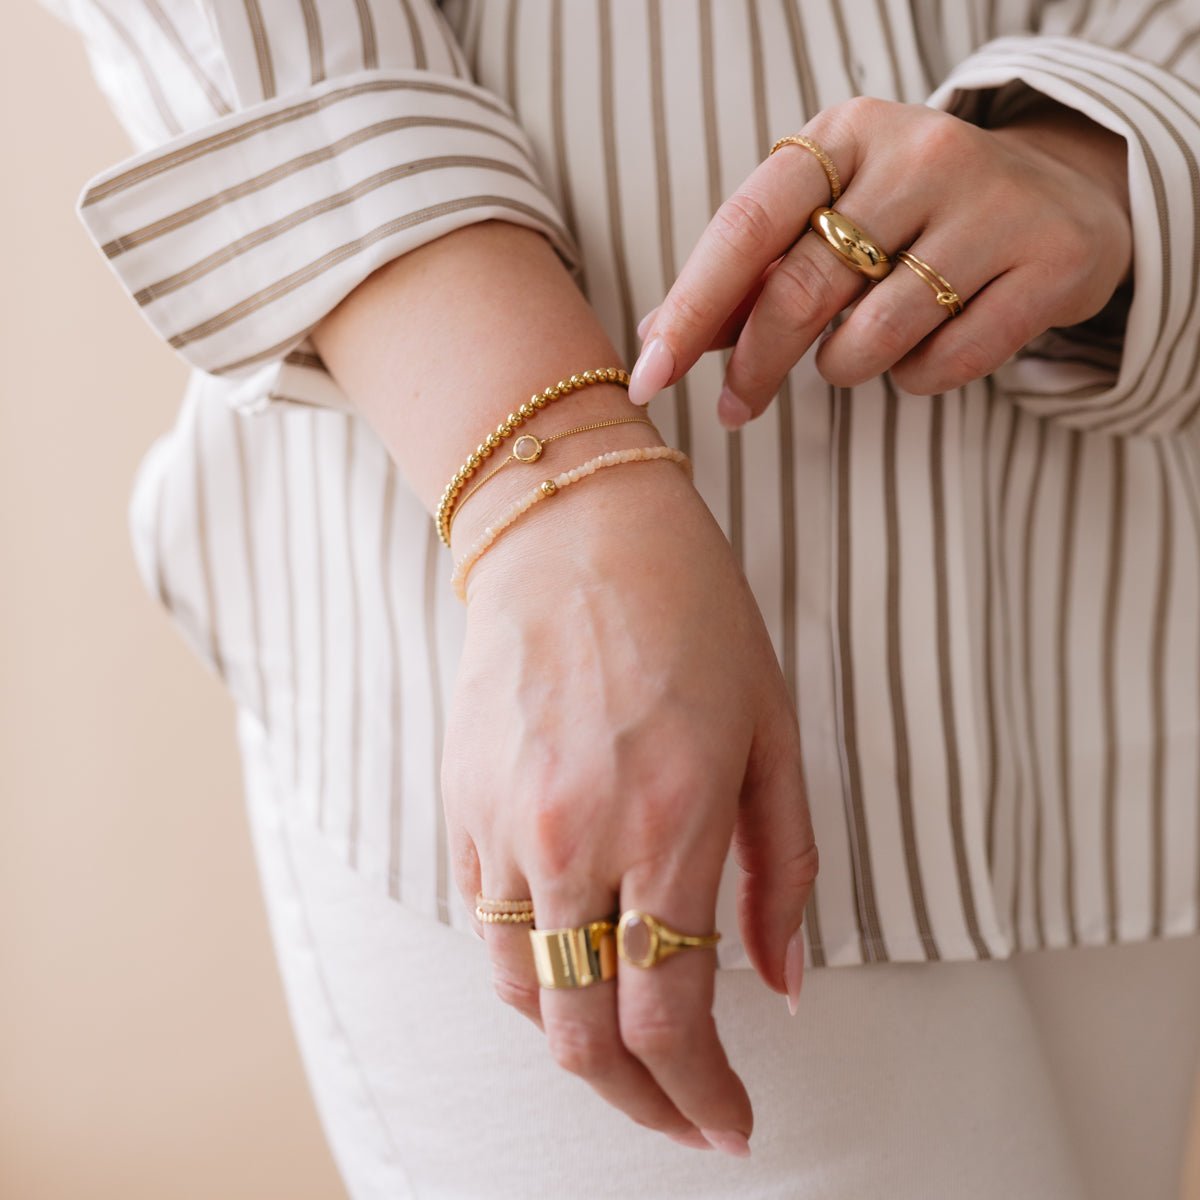 ICONIC BEADED STRETCH BRACELET - PEACH MOONSTONE &amp; GOLD - SO PRETTY CARA COTTER